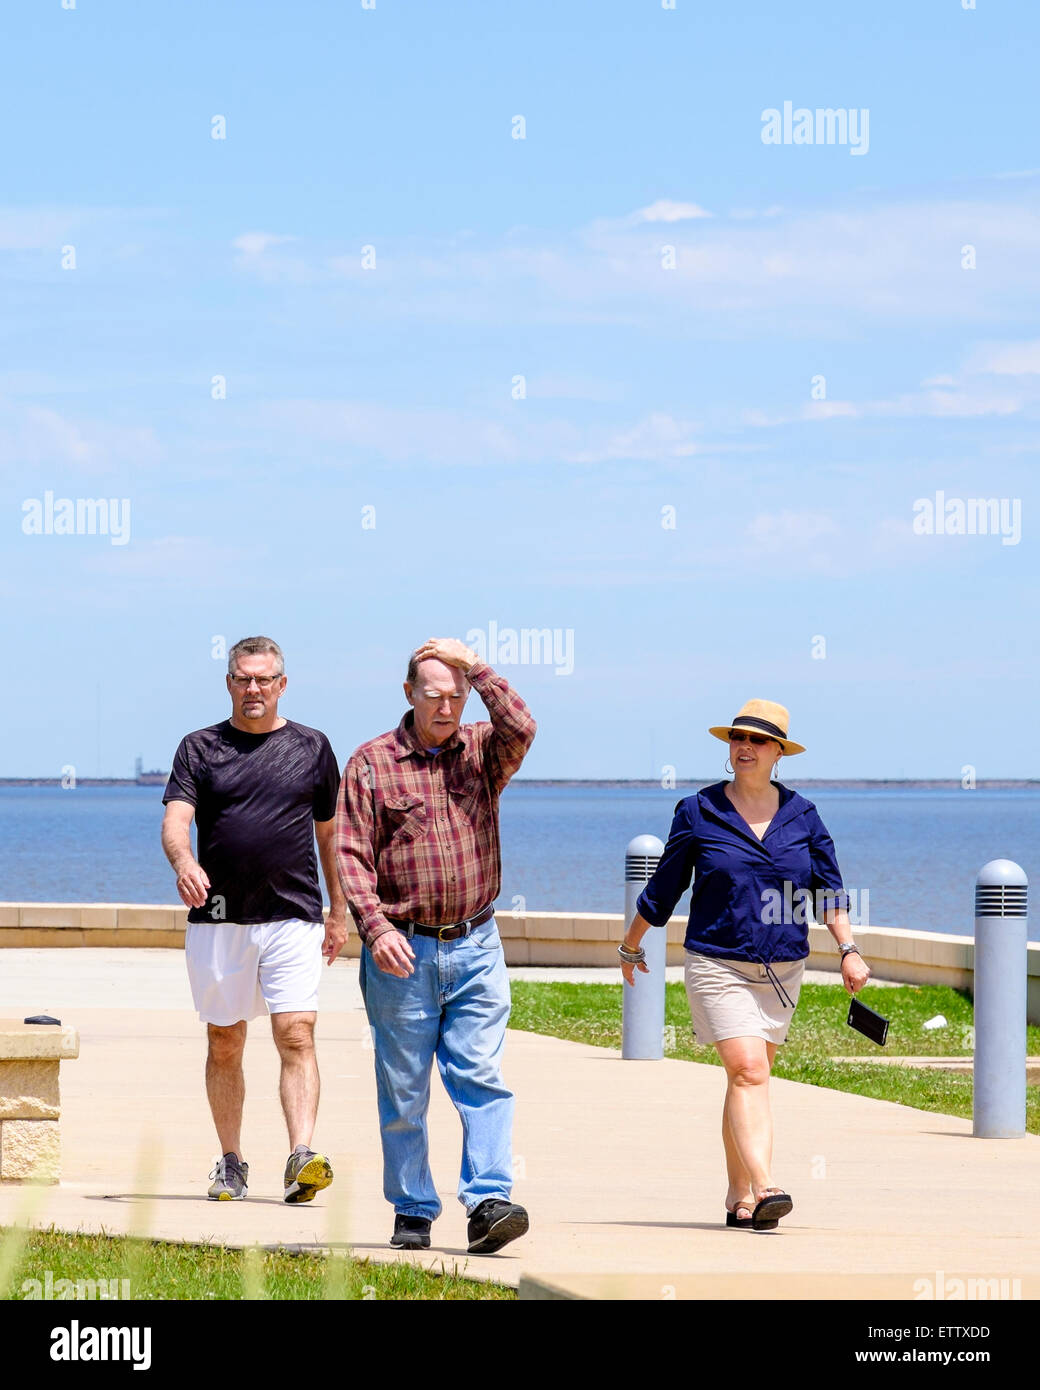 A senior Caucasian man in his 70s protects his bald head from the sun while walking with family. Stock Photo